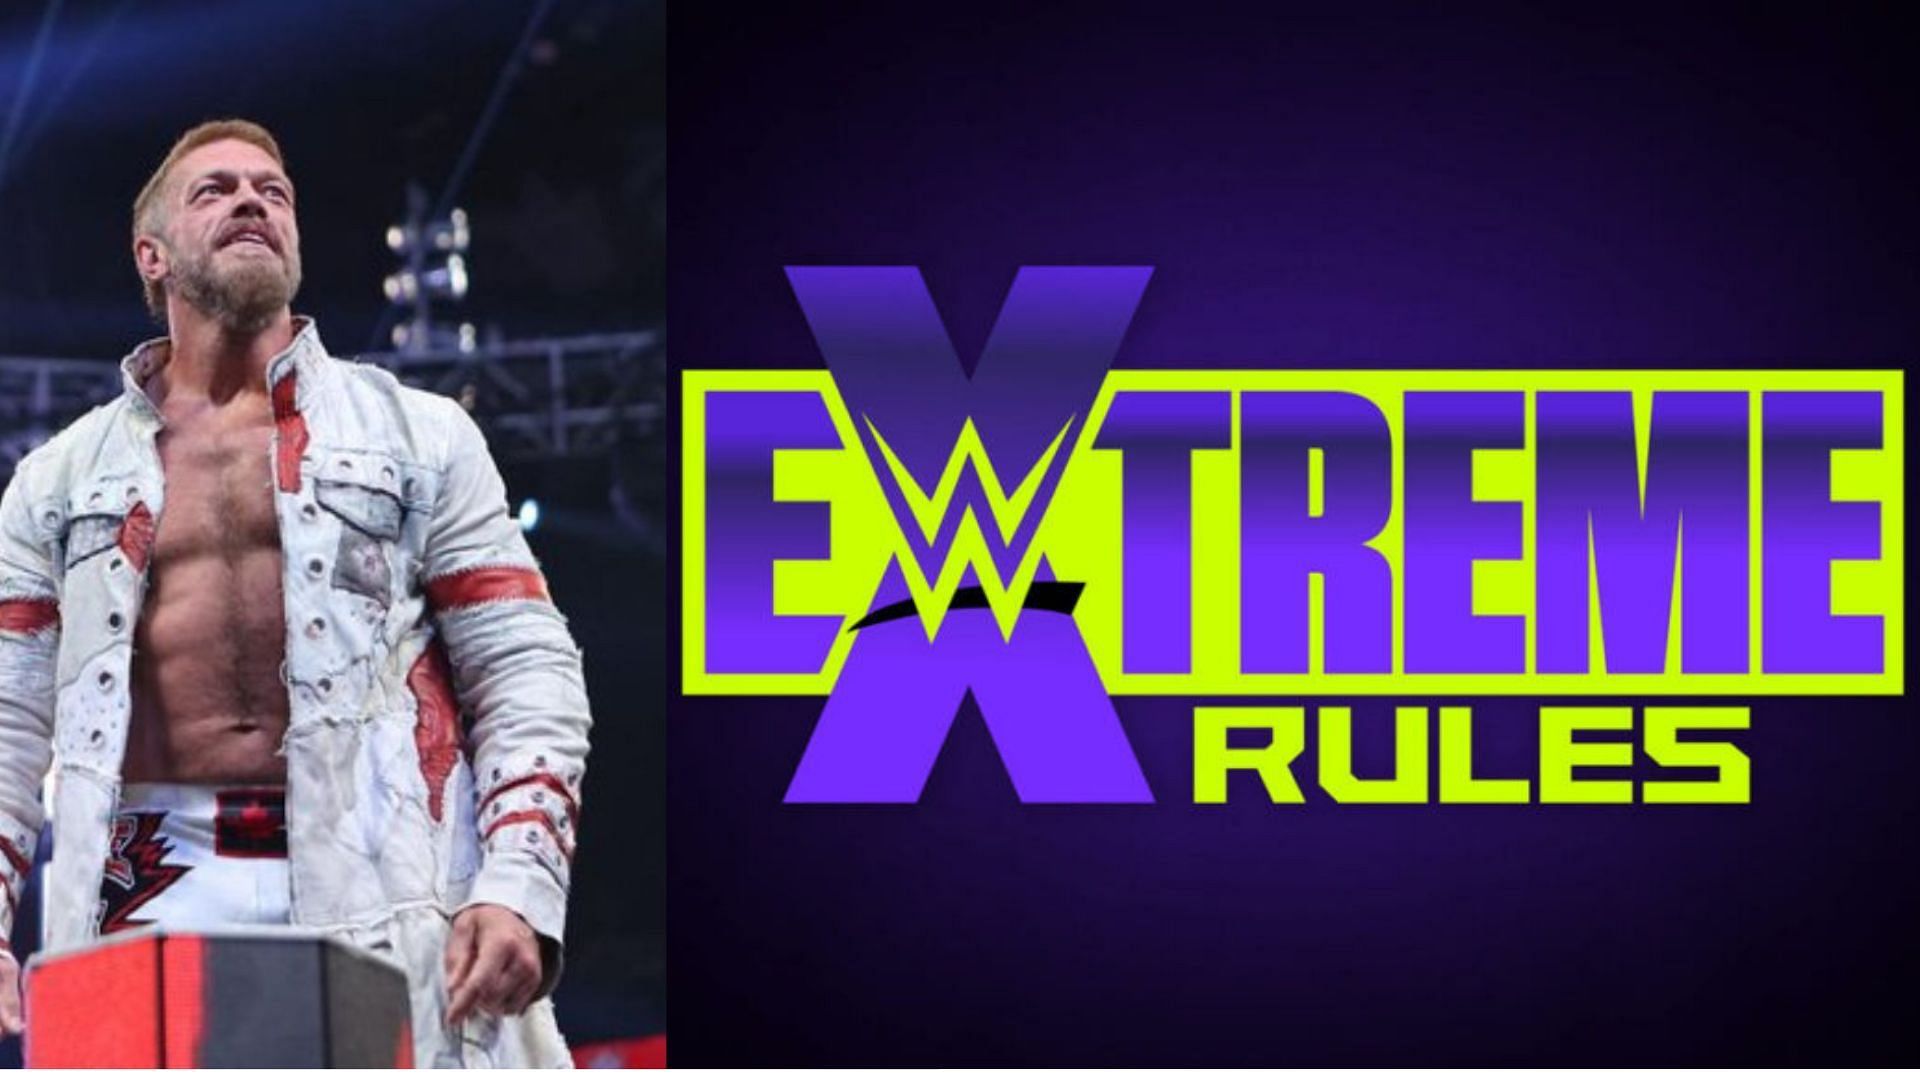 Will Edge compete at Extreme Rules?